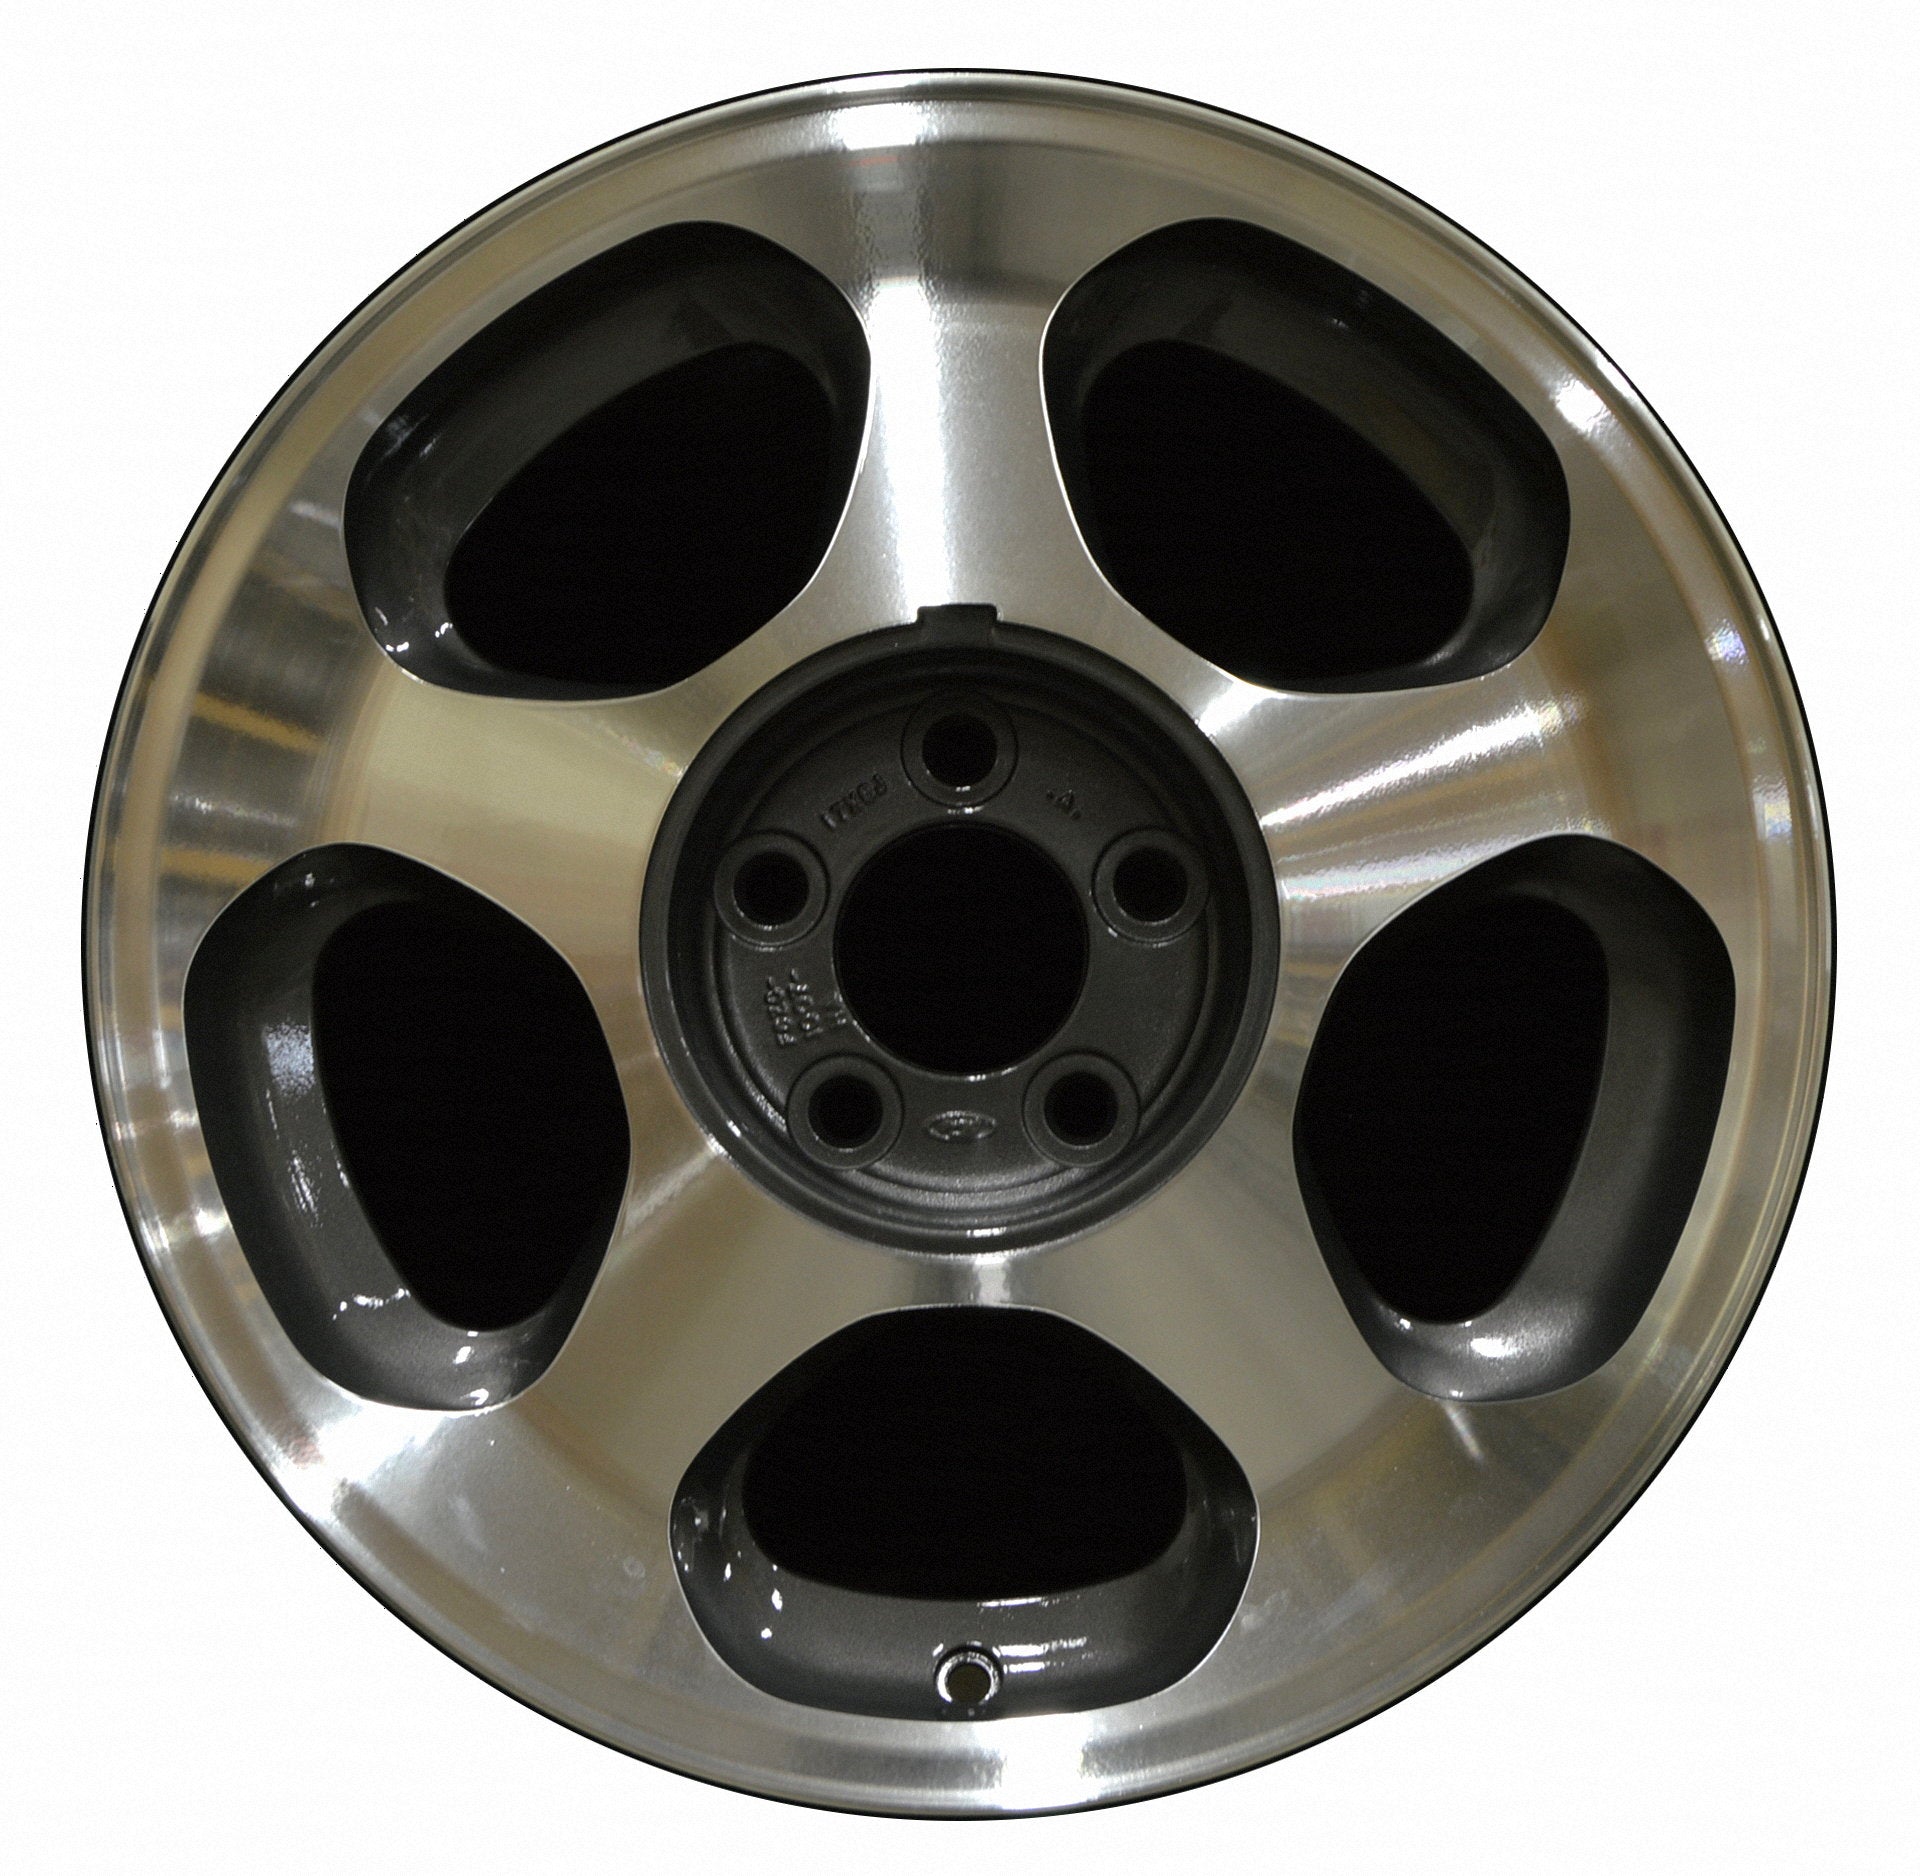 Ford Mustang  1993, 1994, 1995, 1996, 1997, 1998 Factory OEM Car Wheel Size 17x8 Alloy WAO.3173A.PC02.MA